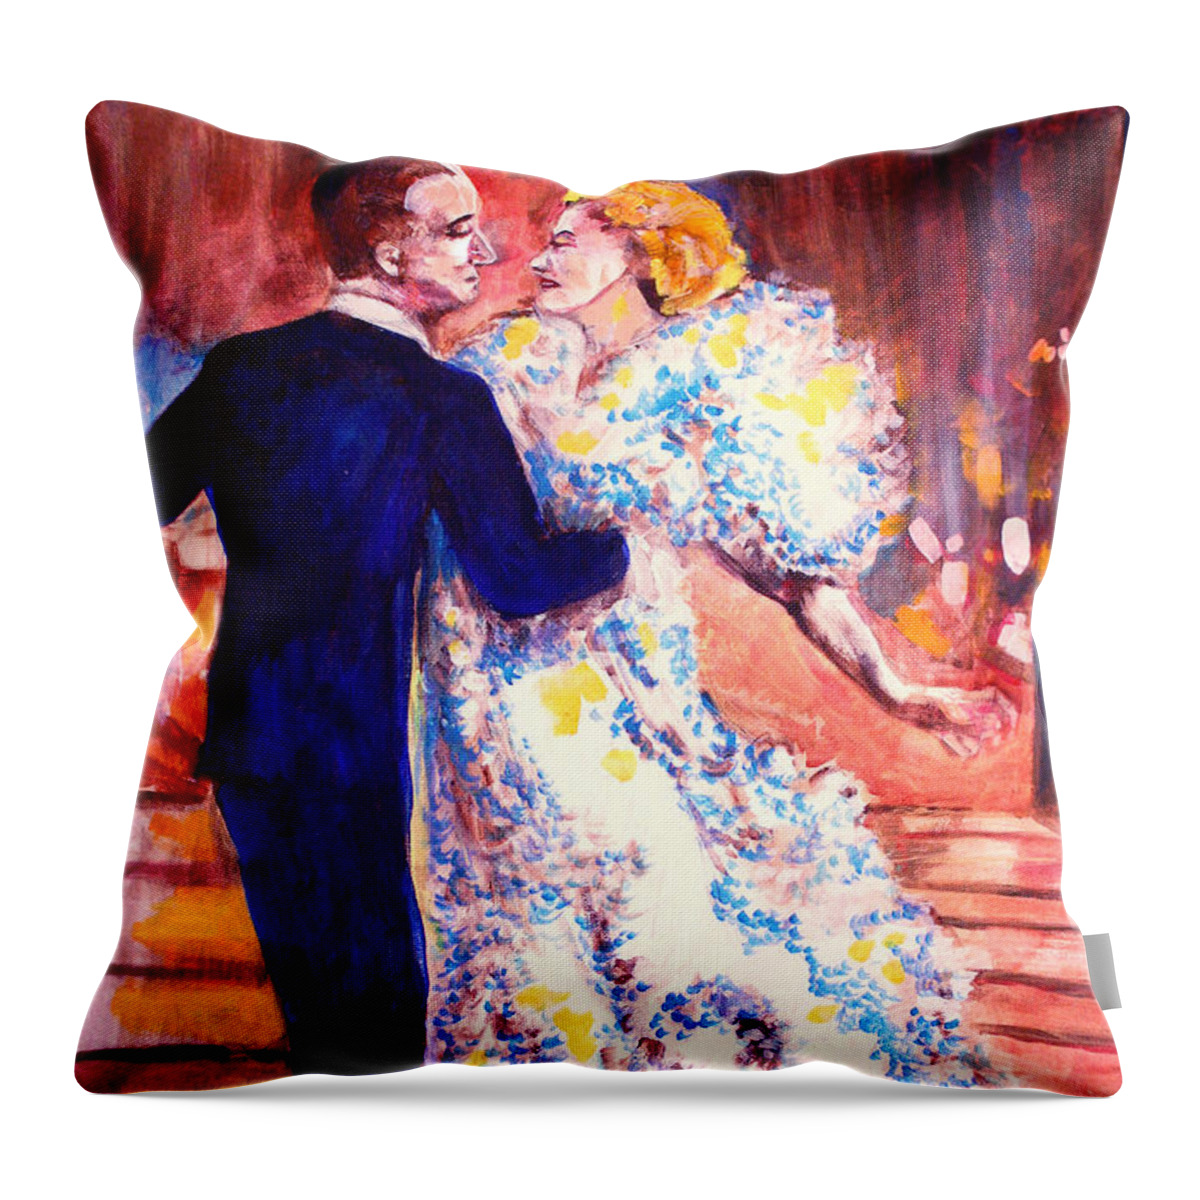 I'm In Heaven Throw Pillow featuring the painting I'm In Heaven by Seth Weaver